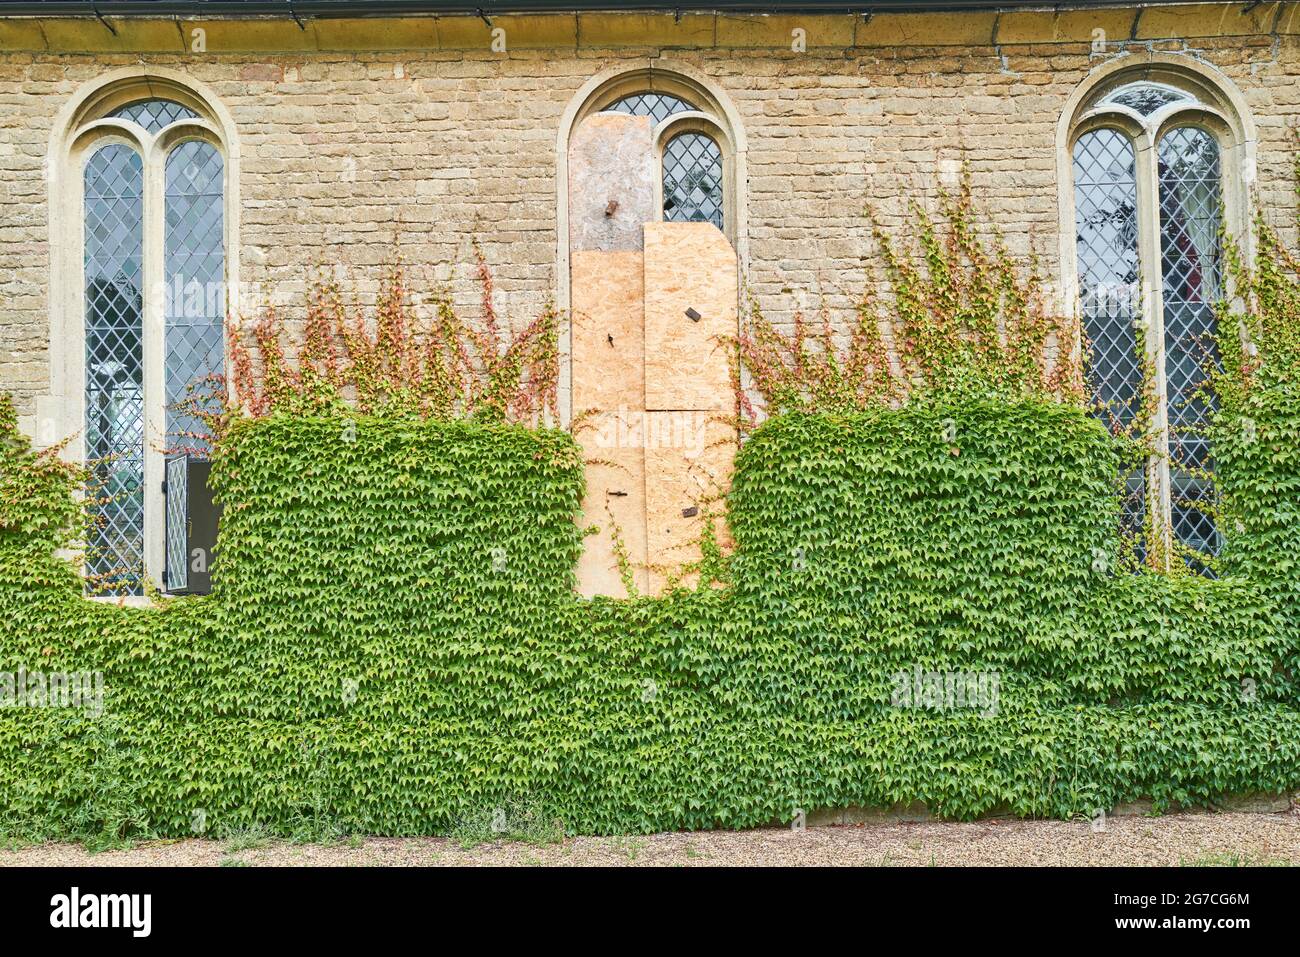 Boarded window at the Creed chapel built by Jemima Creed in the english village of Ashton in 1726, rebuilt by Charles Rothschild in 1900. Stock Photo